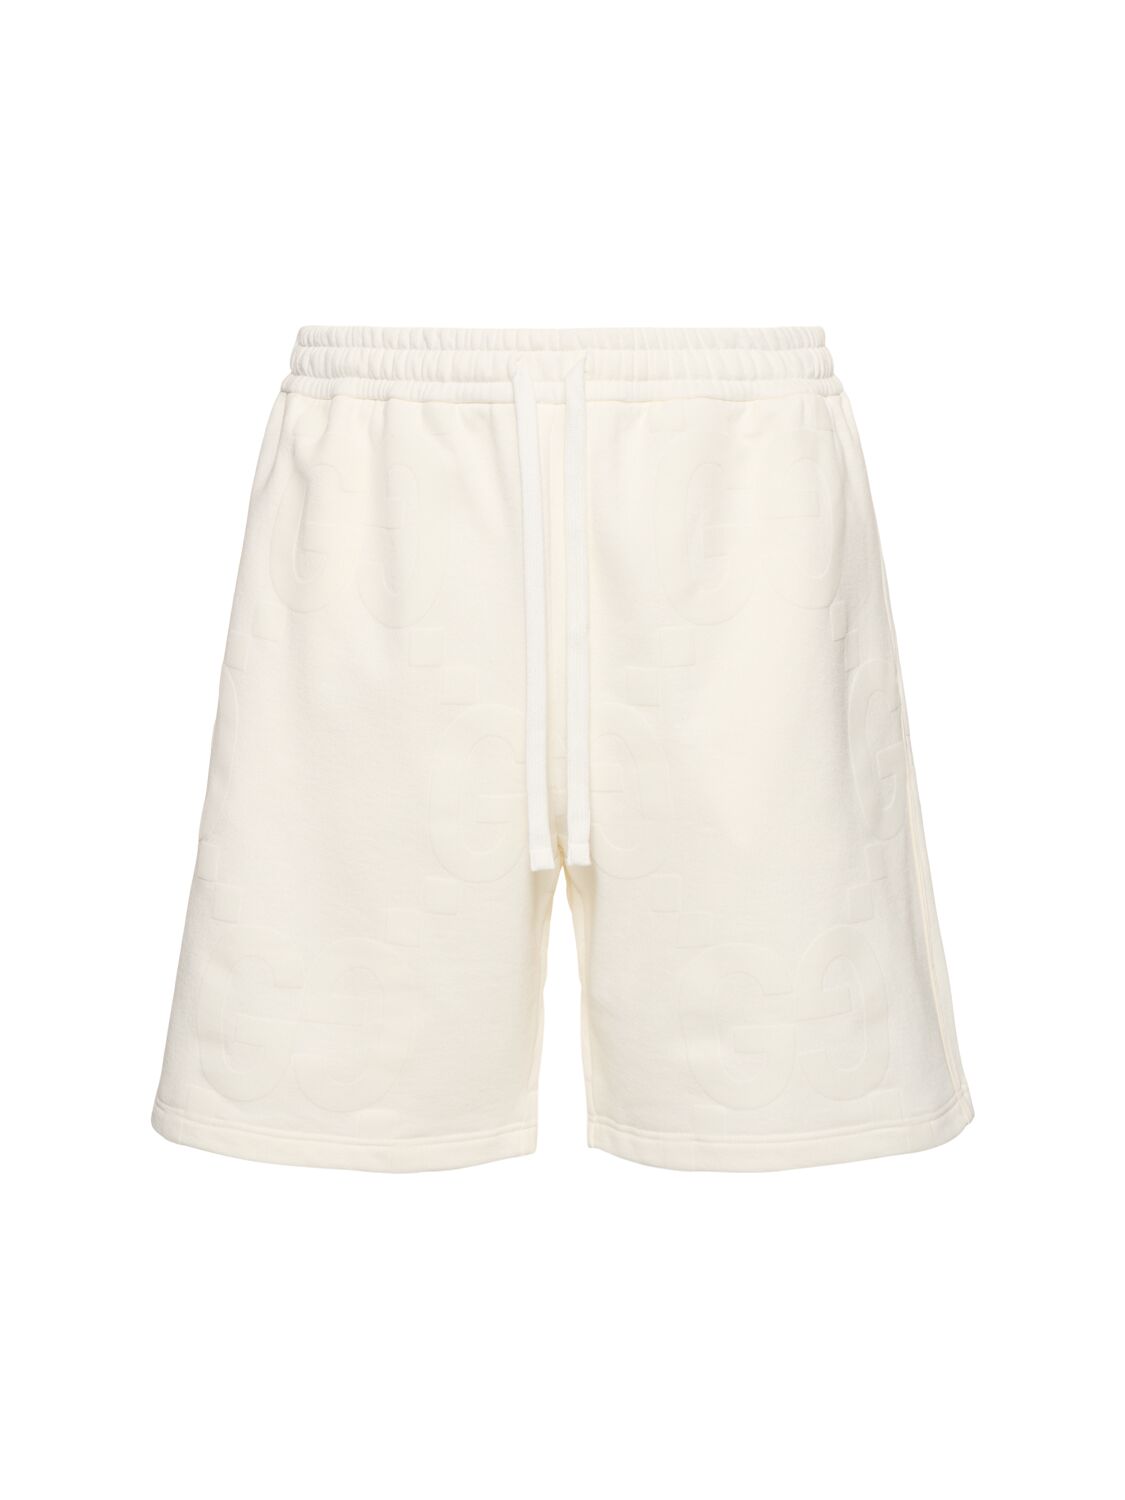 Gucci Light Felted Cotton Jersey Shorts In Ivory